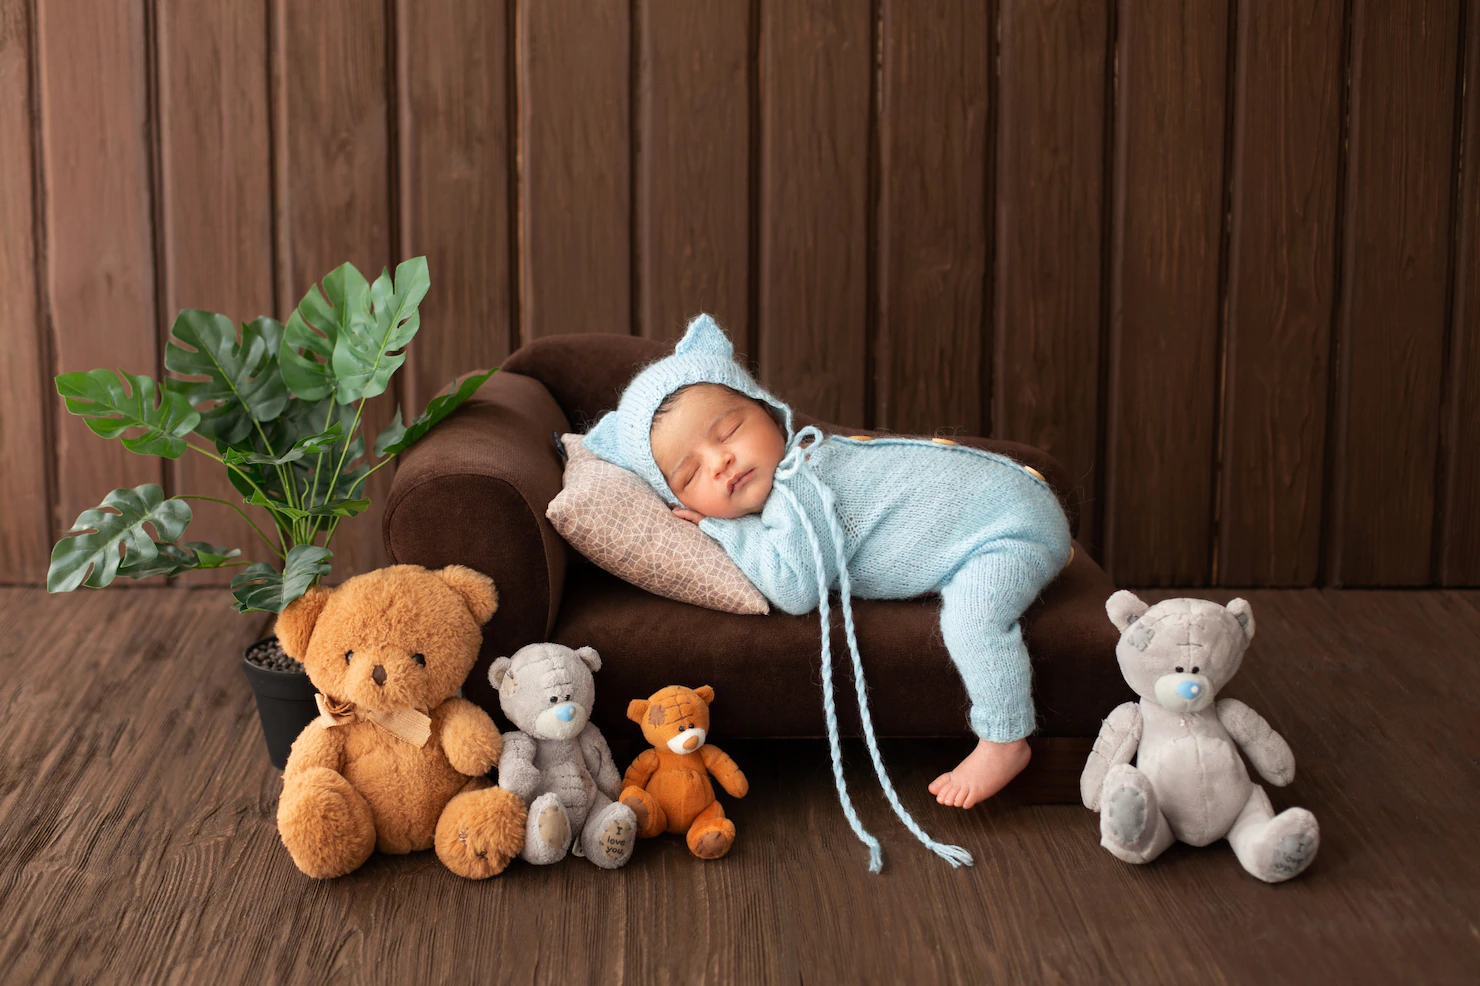 newborn-infant-little-likeable-pretty-baby-boy-sleeping-little-brown-sofa-blue-pijamas-surrounded-by-plant-toy-bears_179666-135